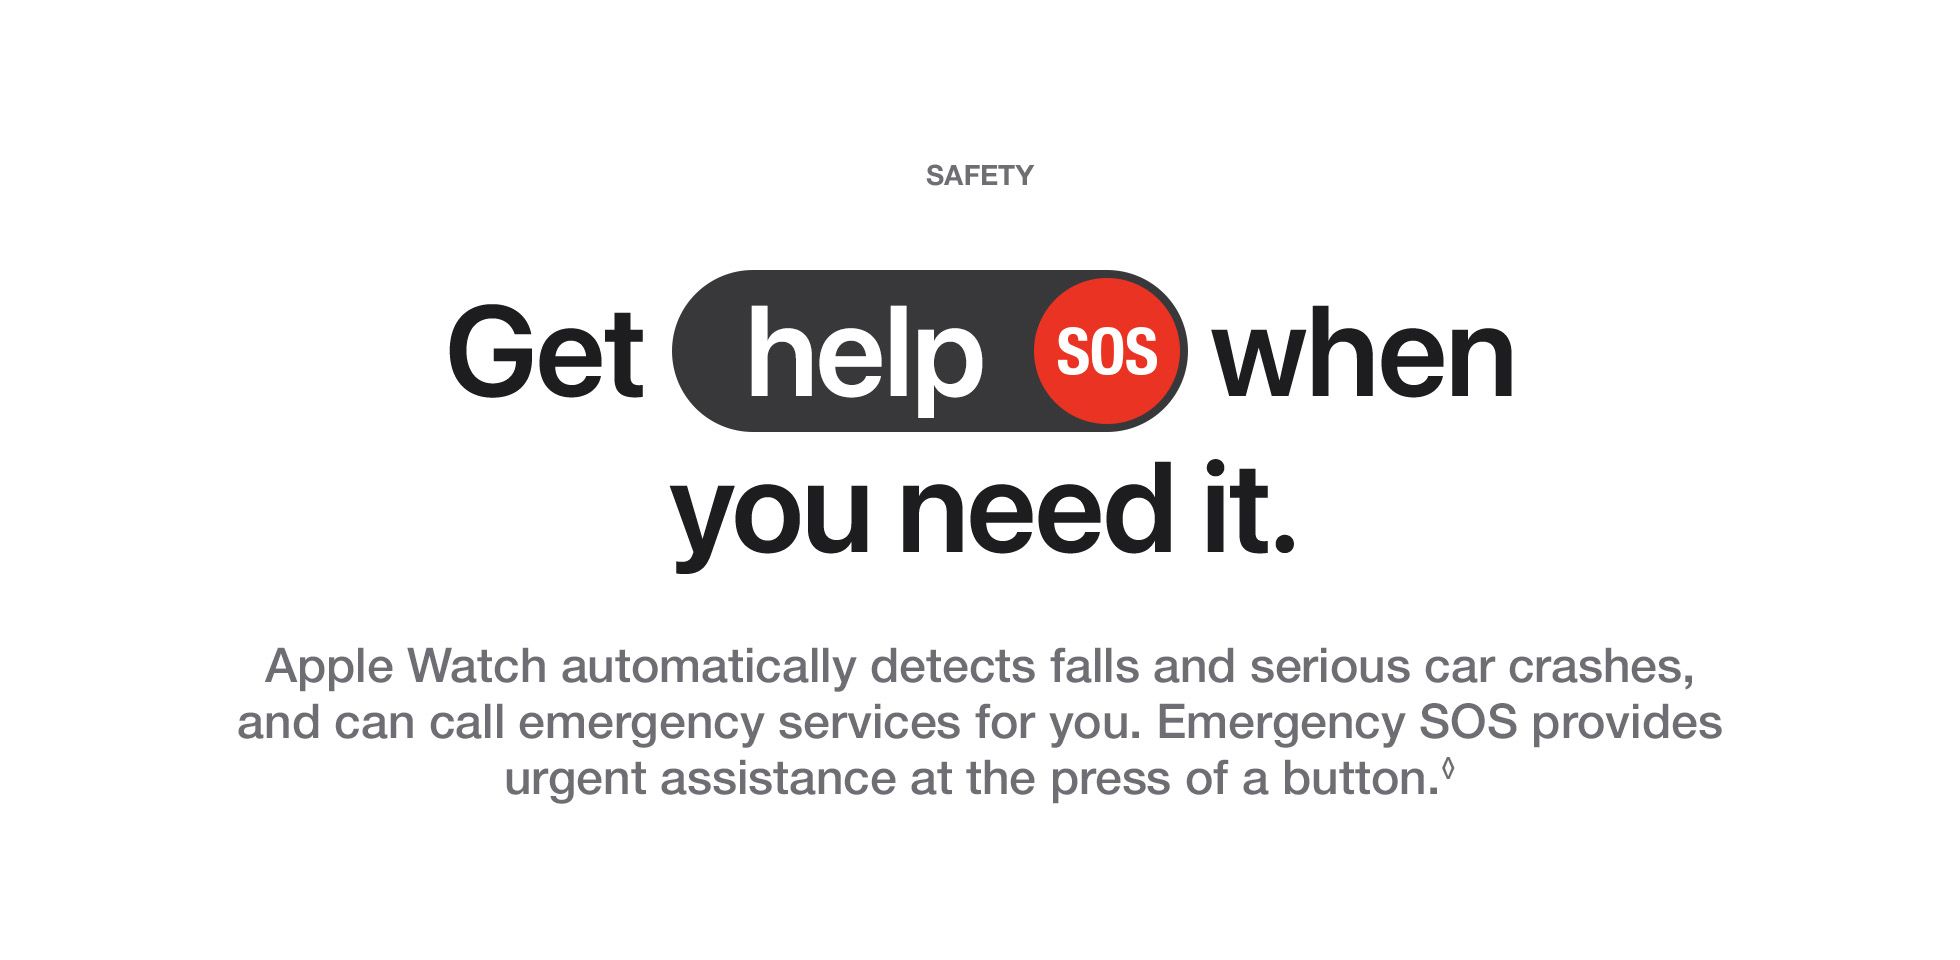 apple watch safety - get help when you need it. Apple Watch automatically detects falls and serious car crashes, and can call emergency services for you. Emergency SOS provides urgent assistance at the press of a button.◊